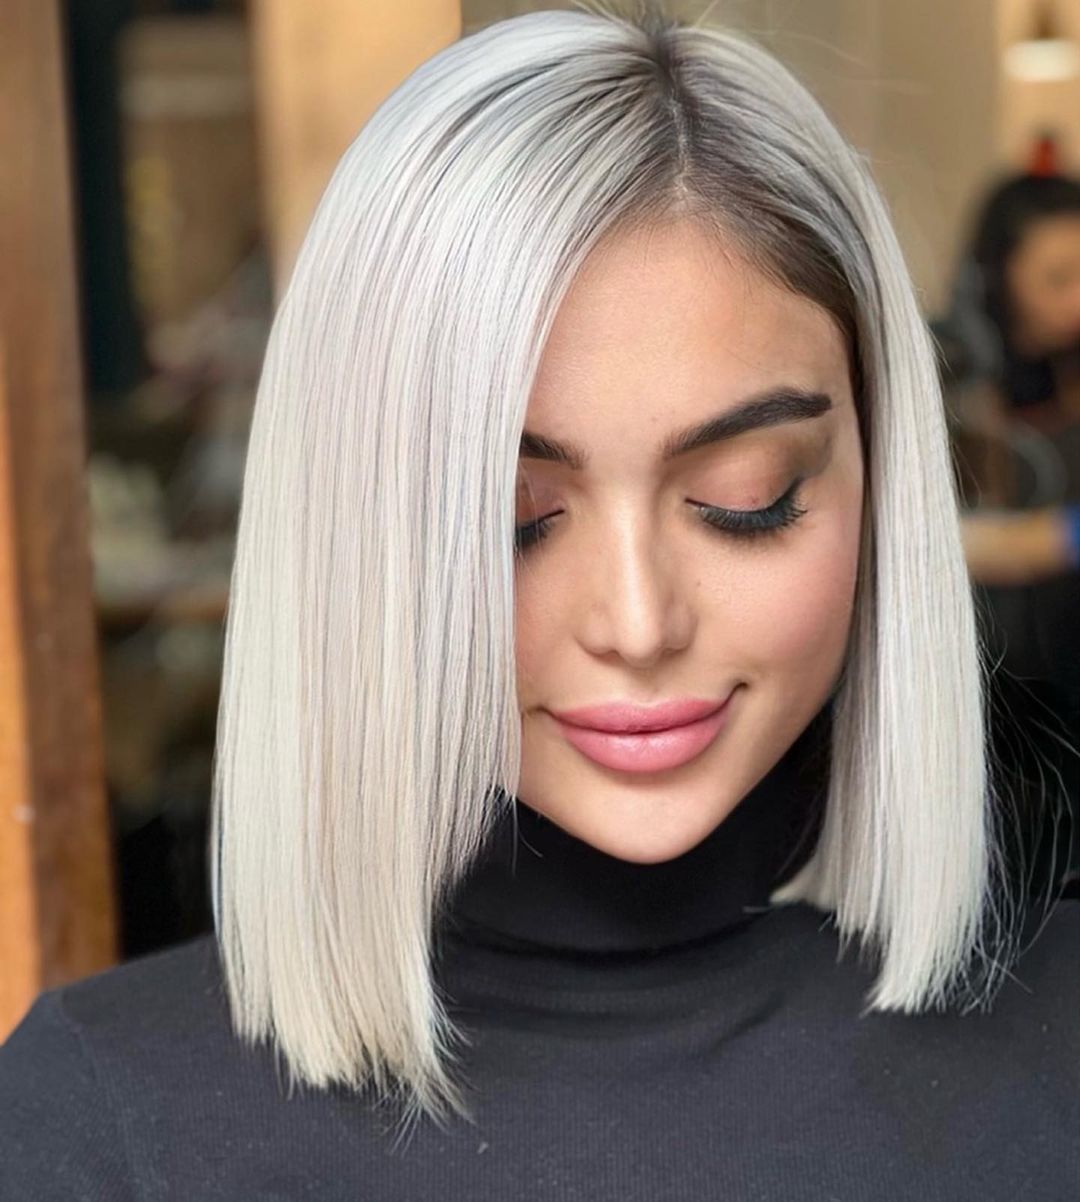 40 Silver Hair Ideas for a Dazzling and Sophisticated Look - Hairstyle